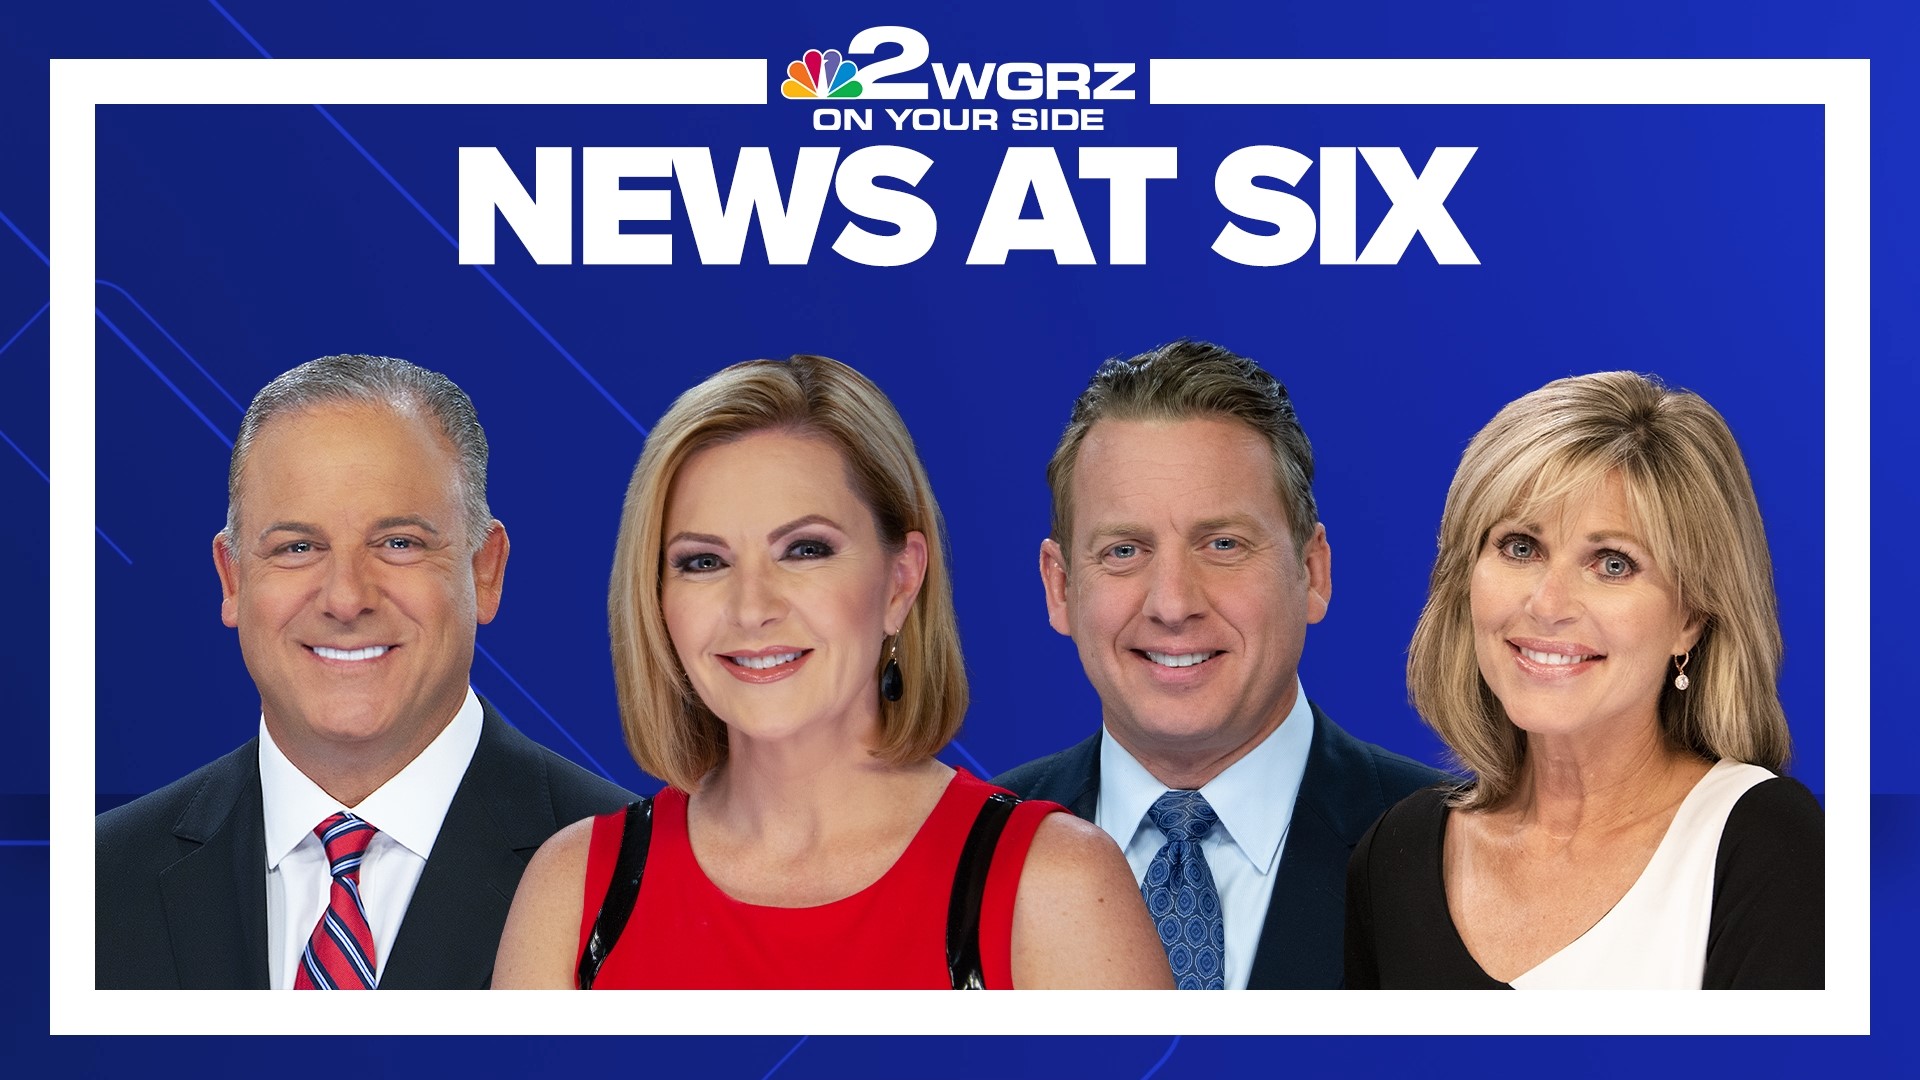 The Channel 2 News Team presents a report of local and national news events, along with the latest weather forecast and sports updates.